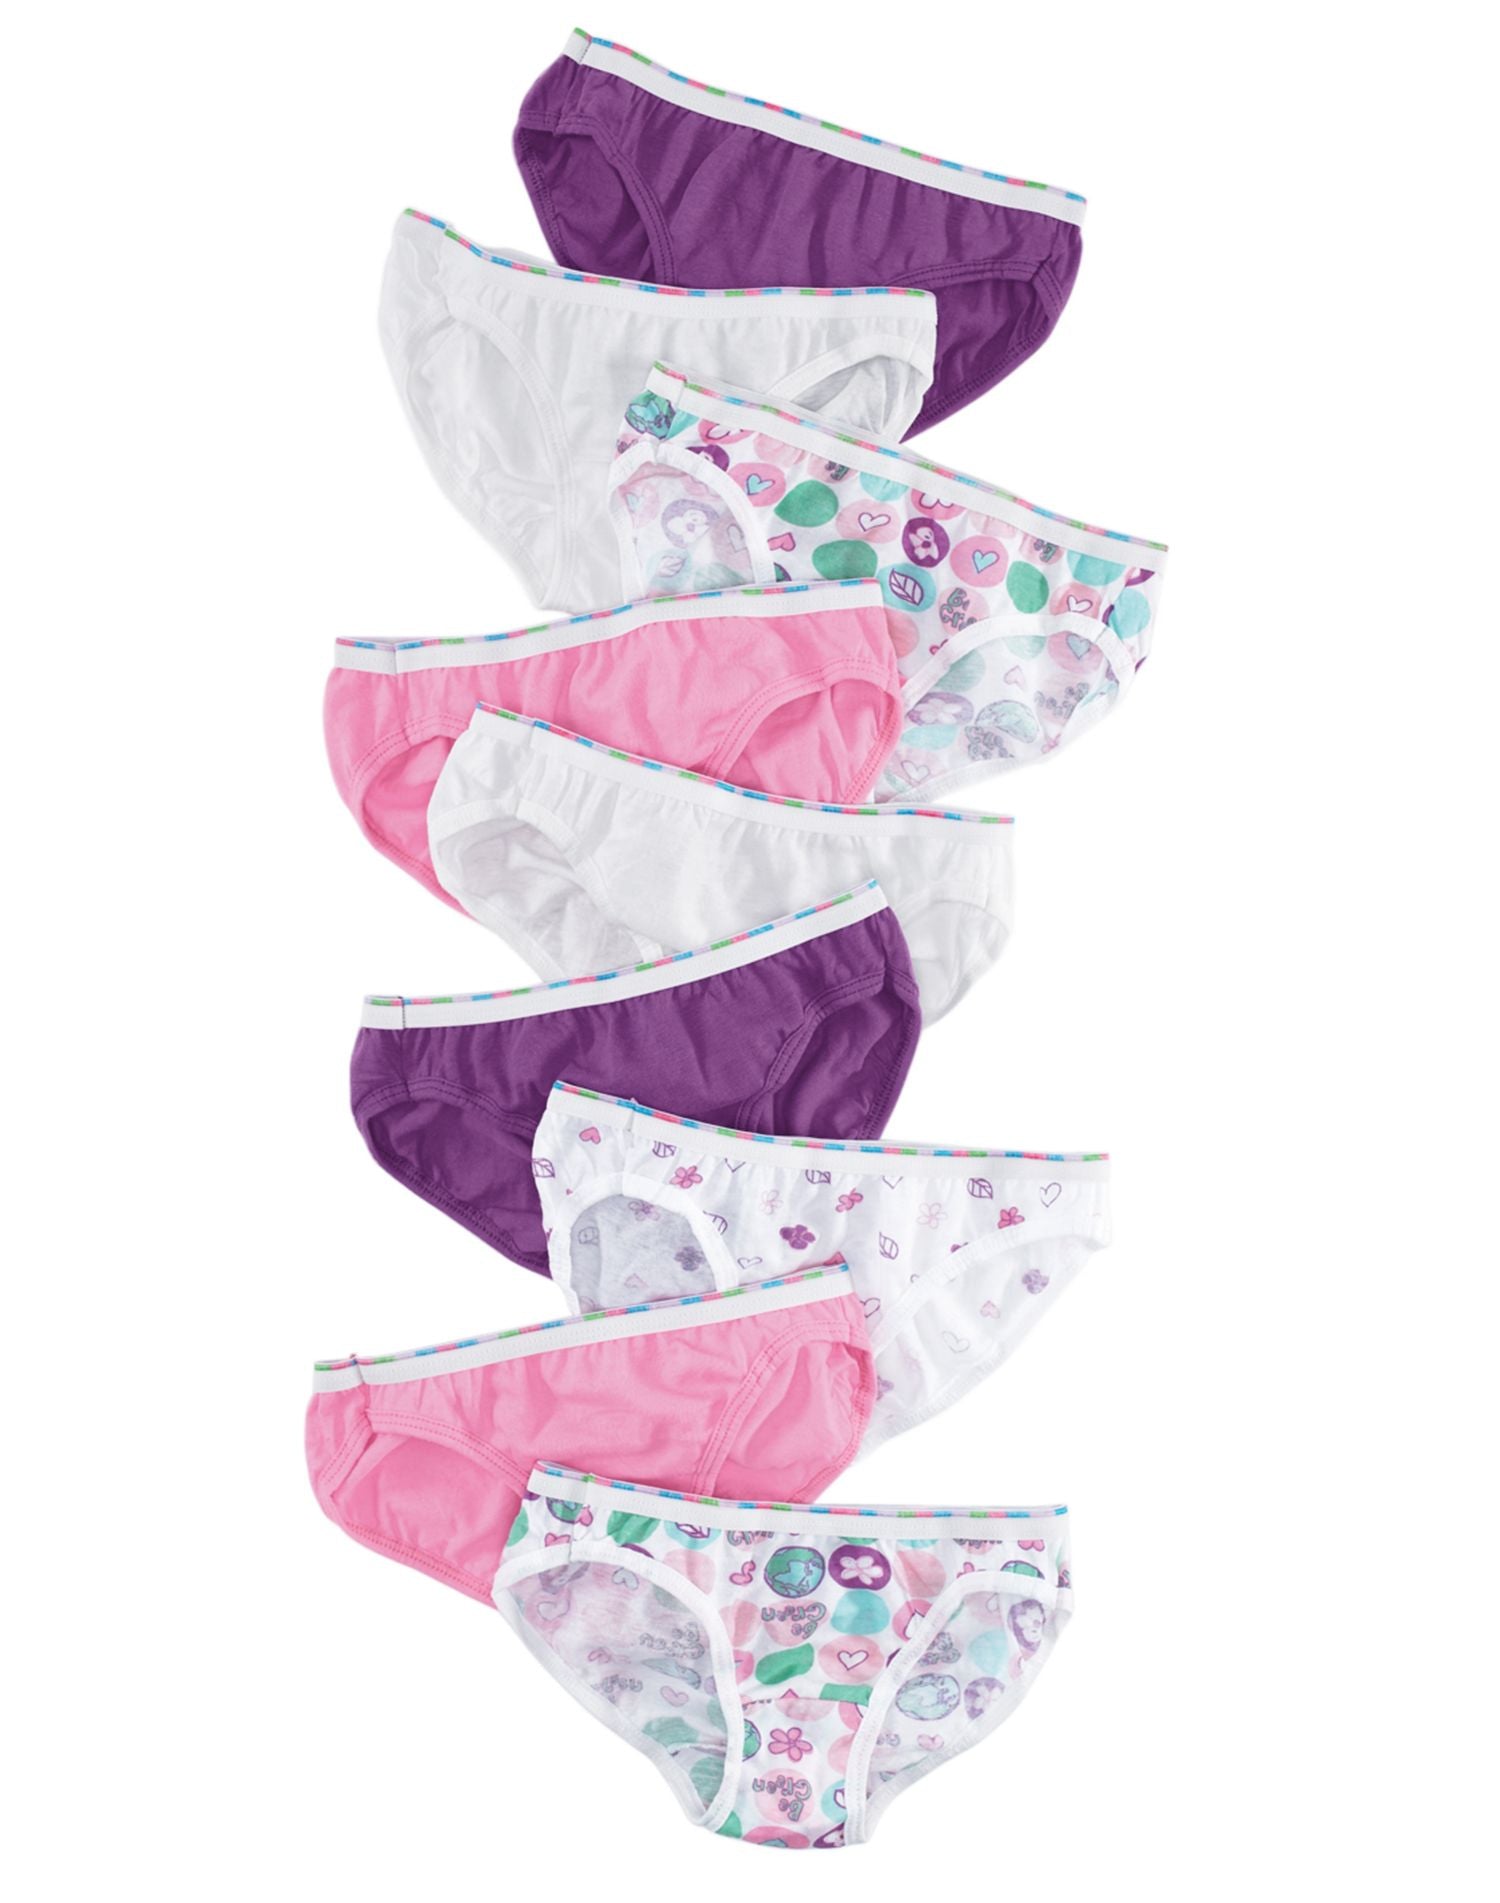 Hanes Girls' 100% Cotton Tagless Brief Panties, Assorted 9-Pack